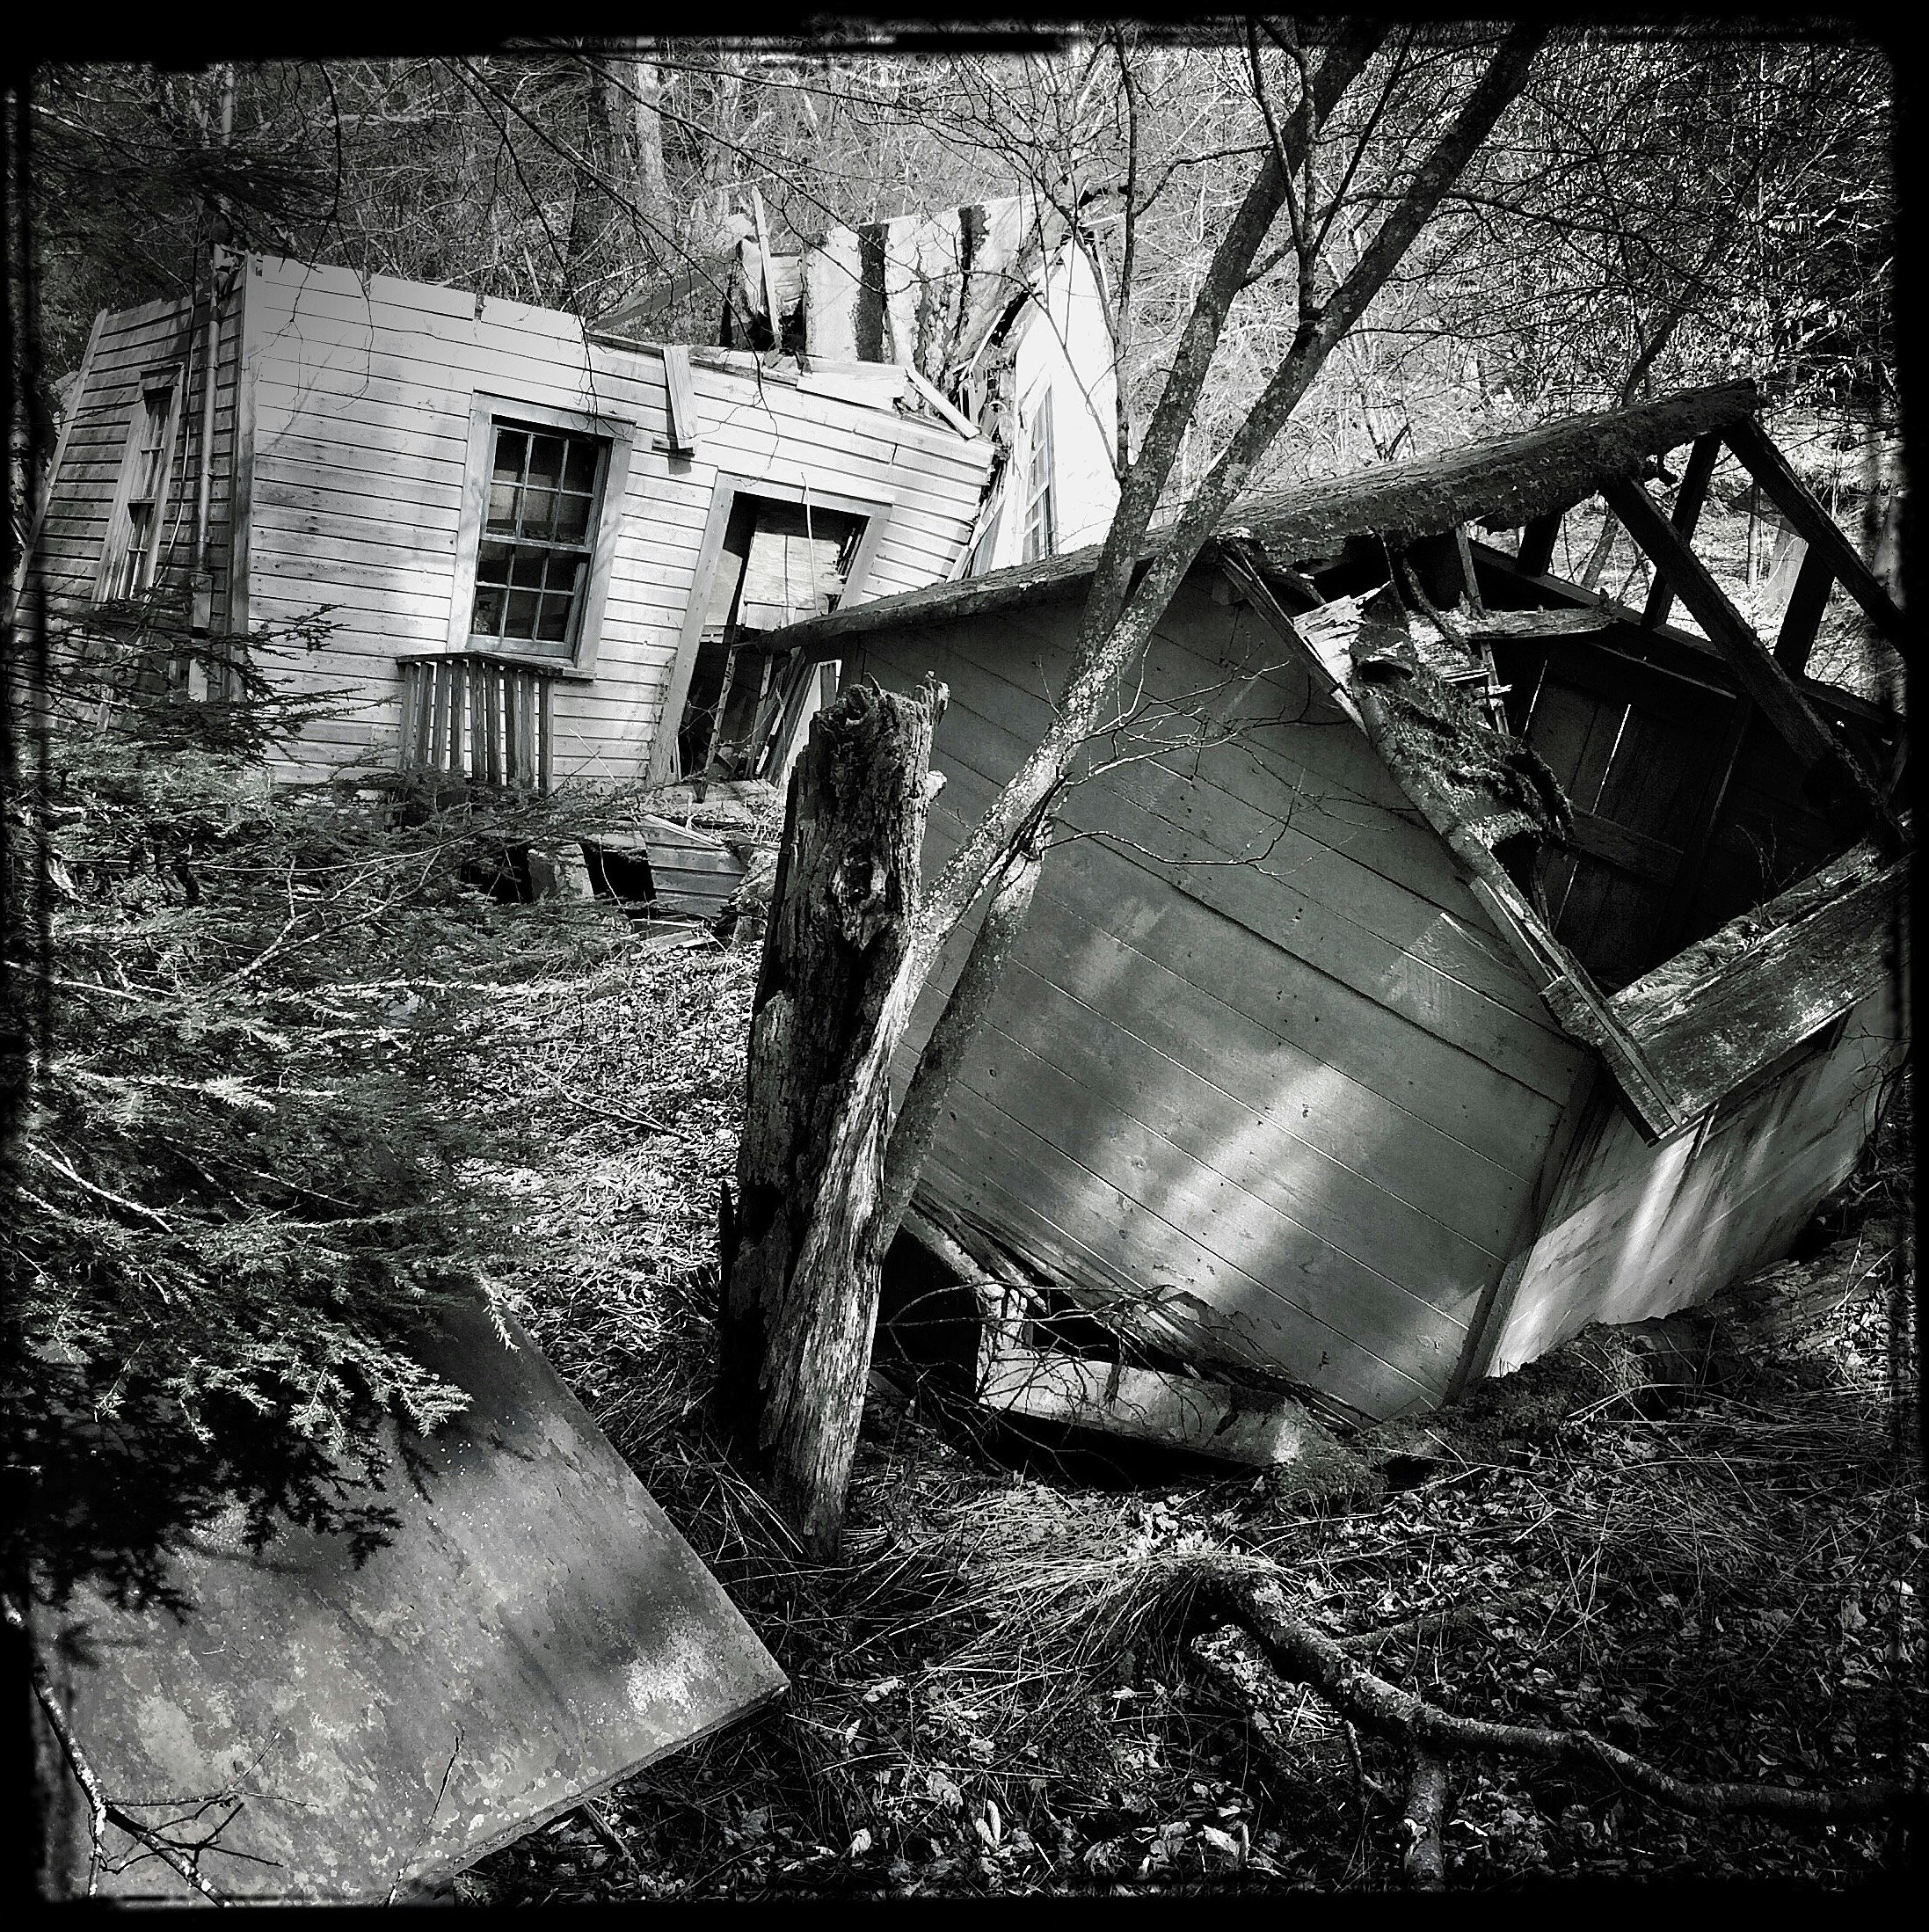 Two bungalows in Sullivan County, New York are collapsing in this black and white photo of a former resort town in the Catskills. Neither building has a complete roof any more, and both are listing to the side like rotting Halloween pumpkins. All around them, trees and undergrowth and taking over.